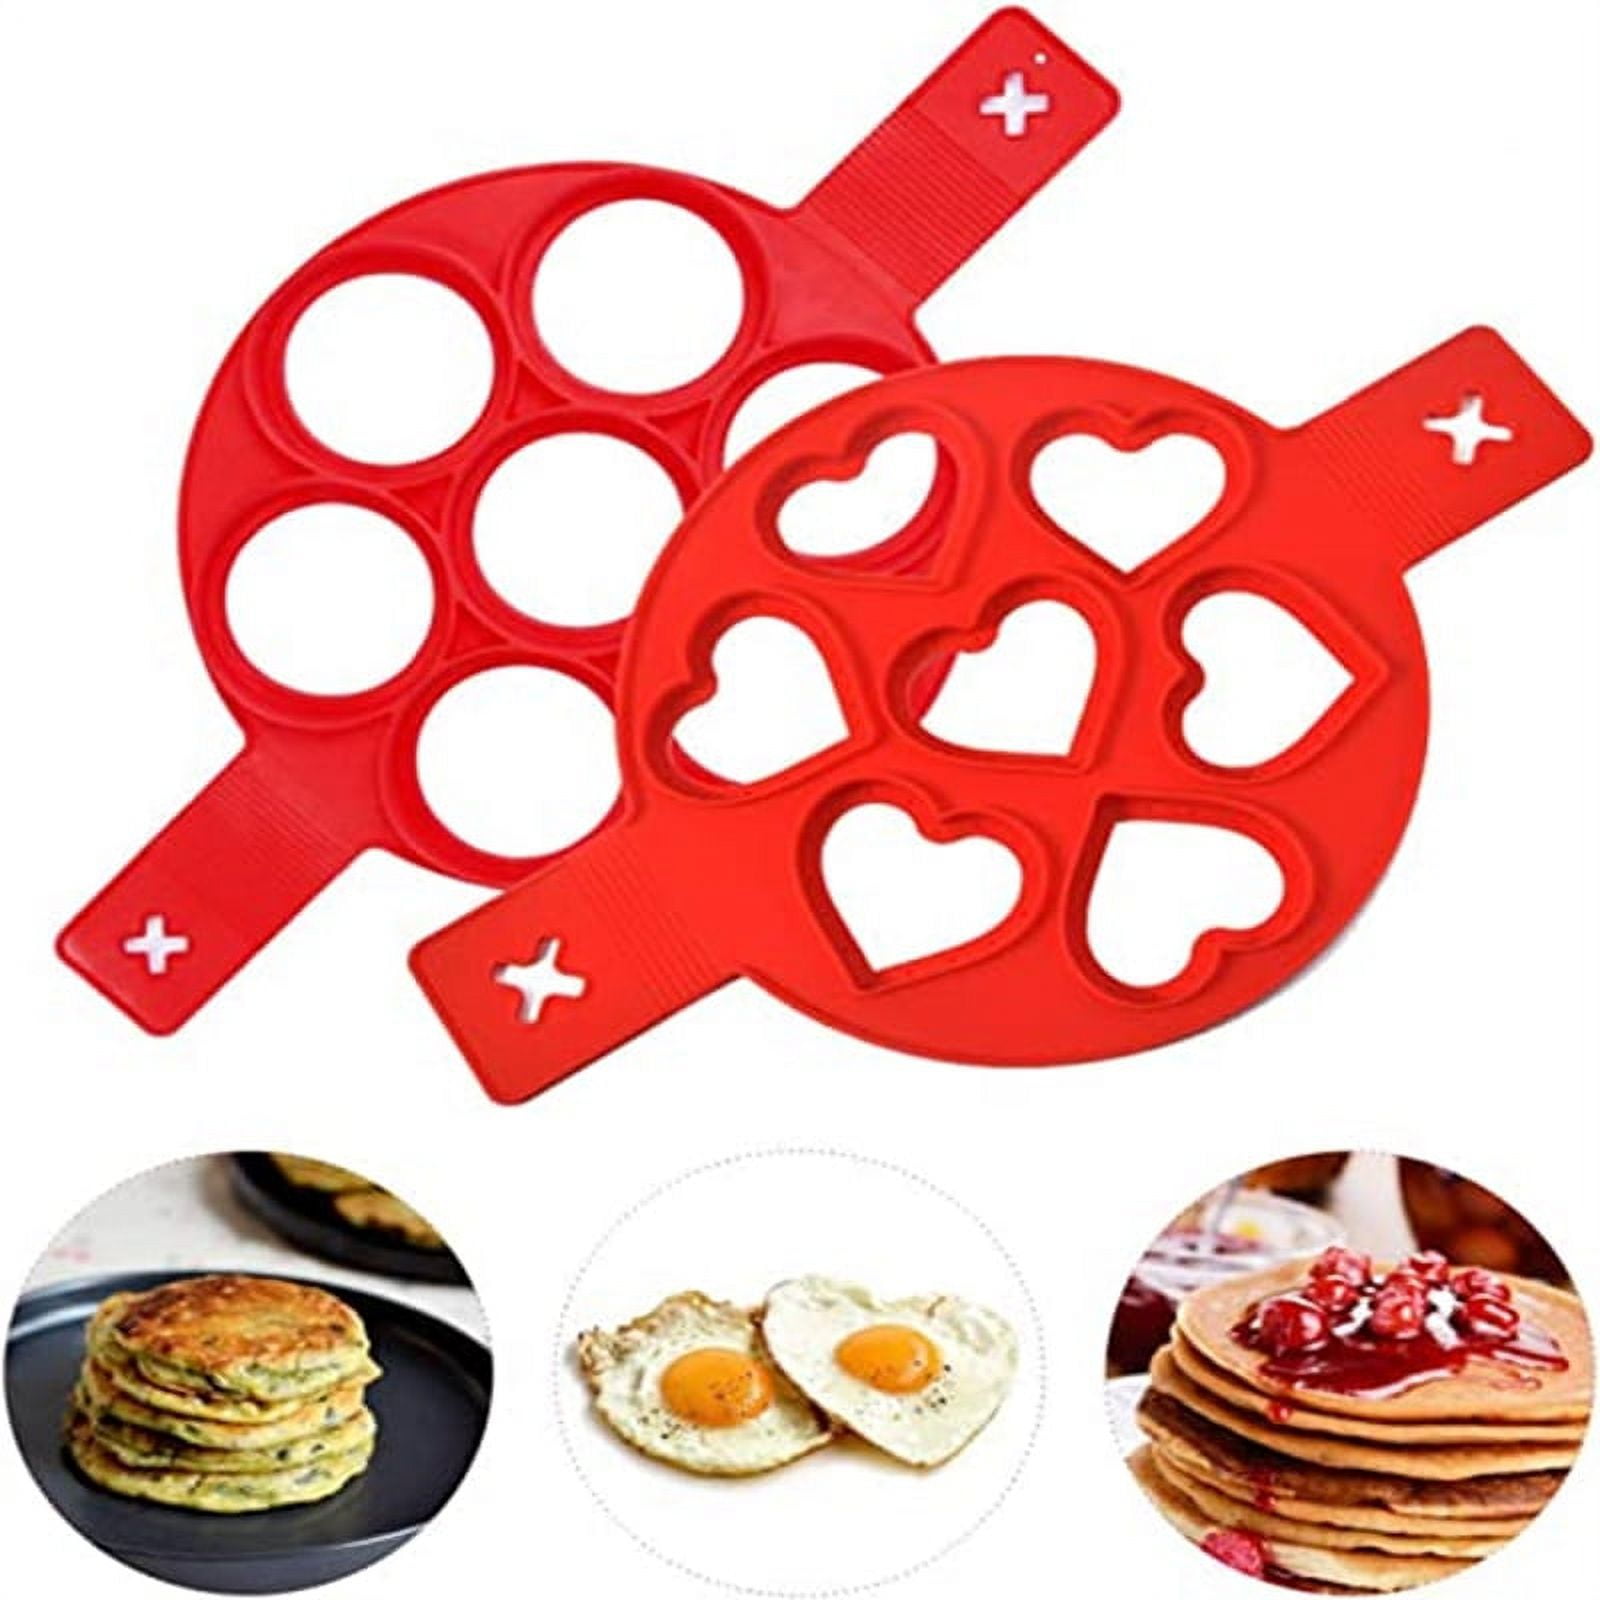 Dropship Silicone 7 Holes Fried Egg Mold Pancake Maker Mold Forms